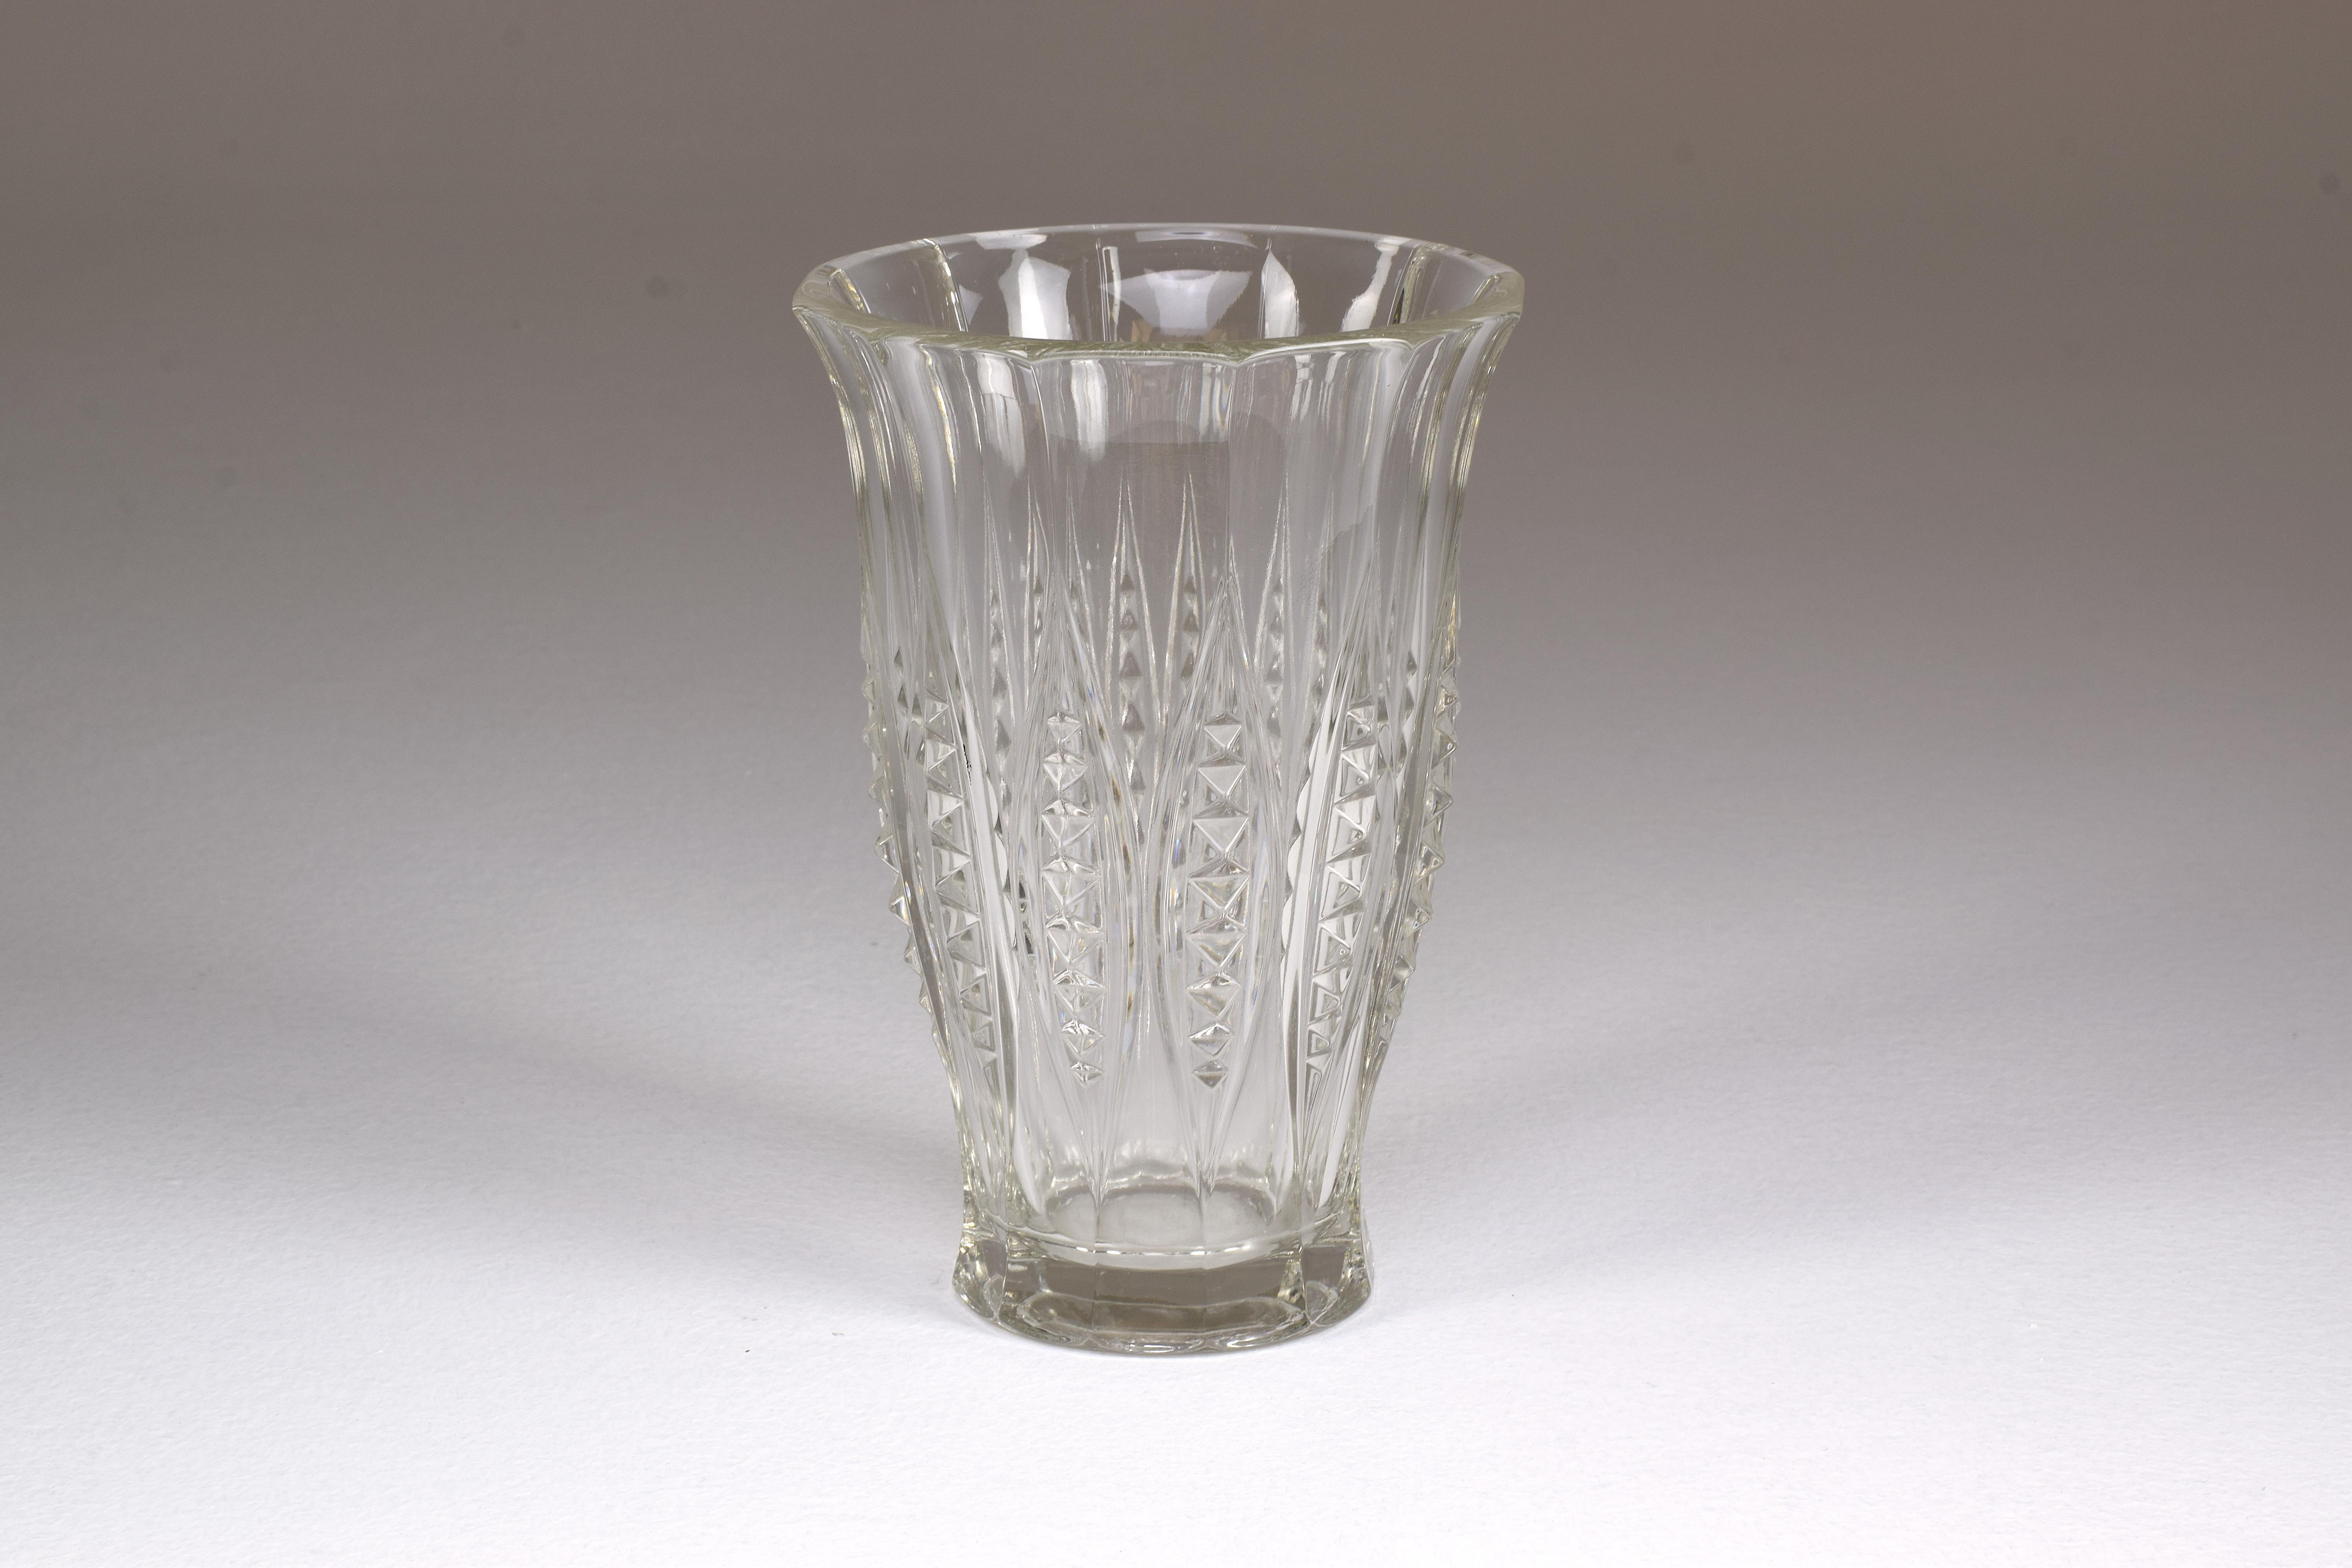 A cut crystal flower decorative vase, designed by Belgian designer Charles Graffart and showcased in the catalog of Val Saint-Lambert in 1935, for the LIXVAL series. It is designed with elegant diamond-cut shapes all around.
Belgium, 1930s.
Signed